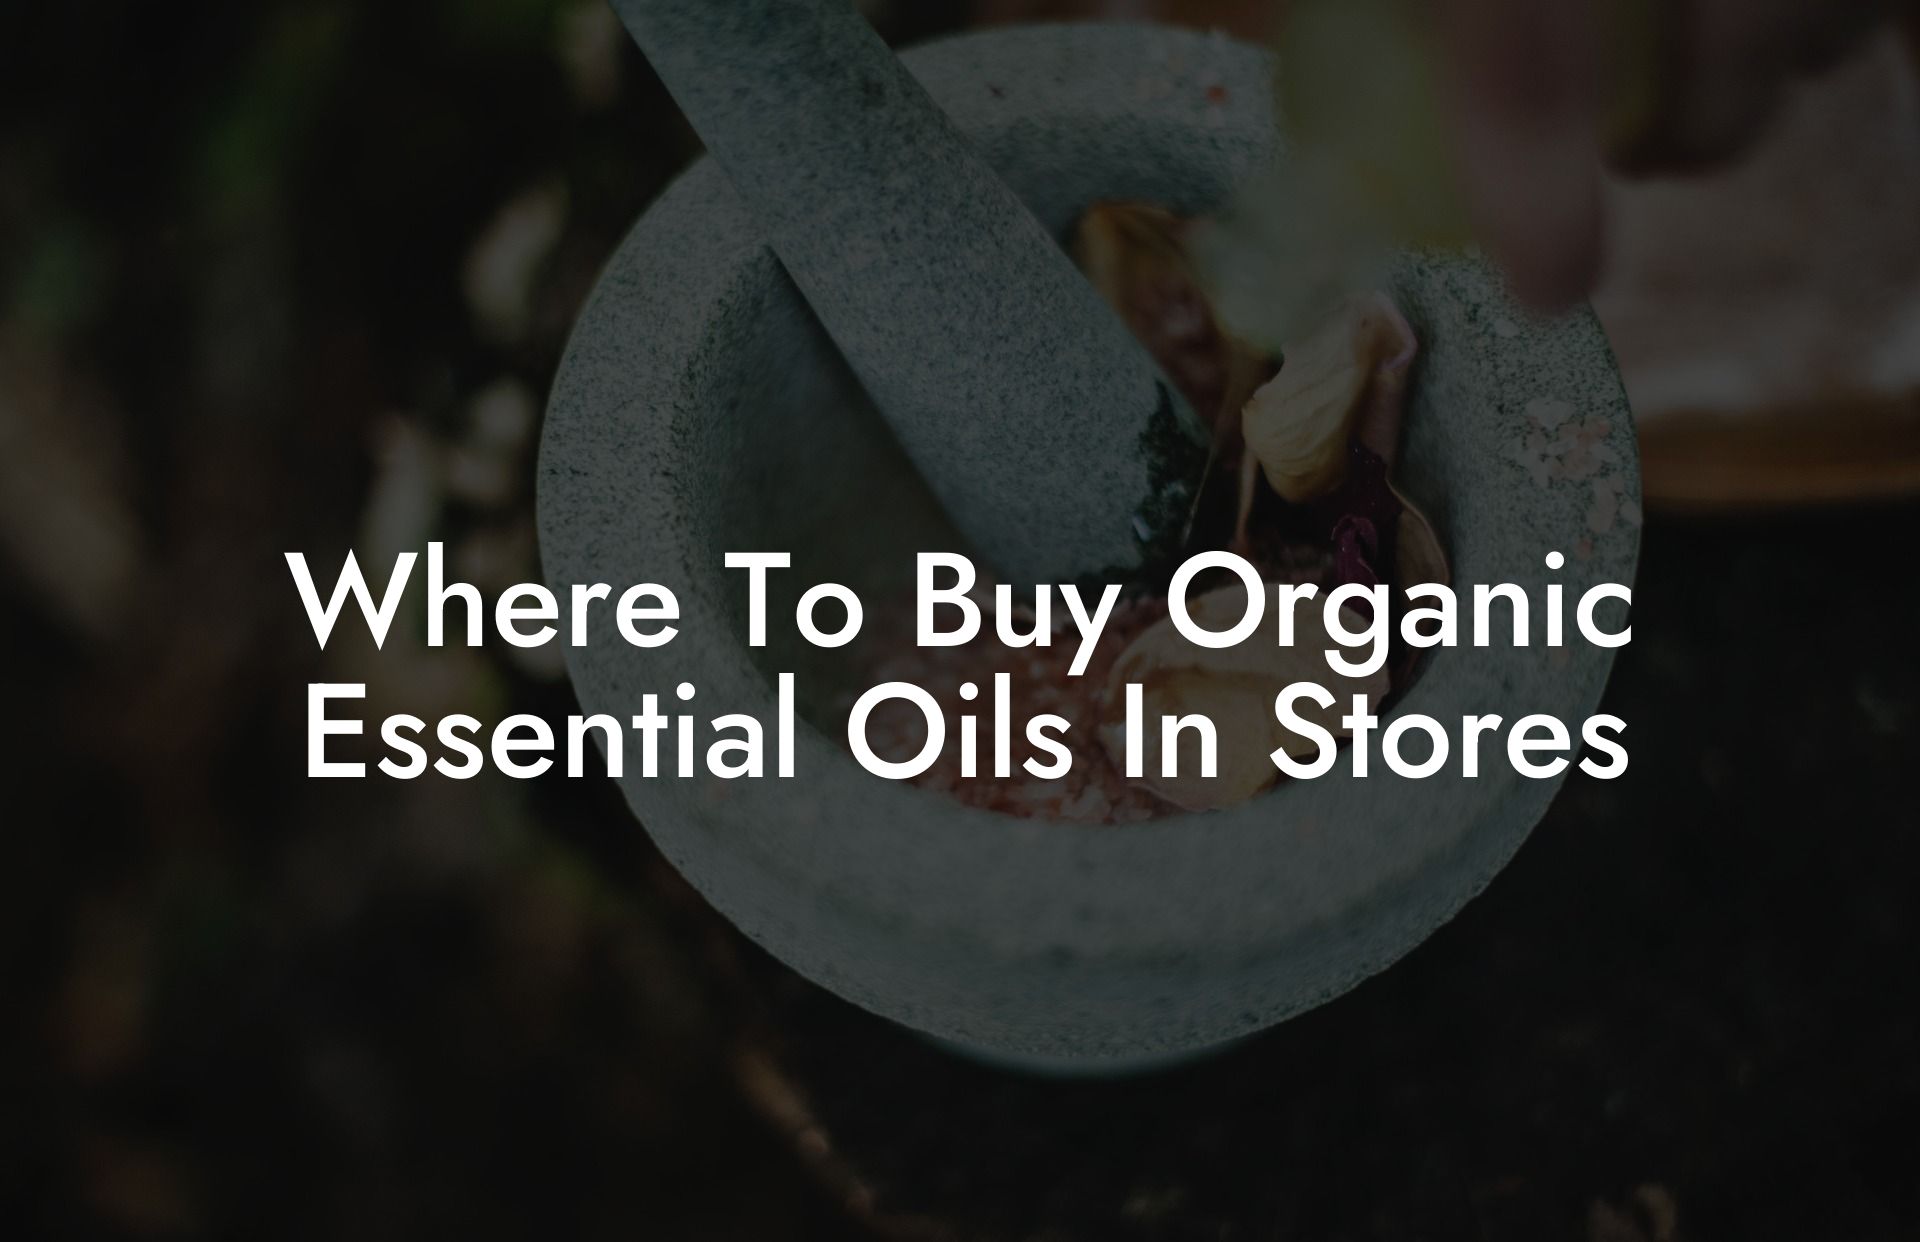 Where To Buy Organic Essential Oils In Stores